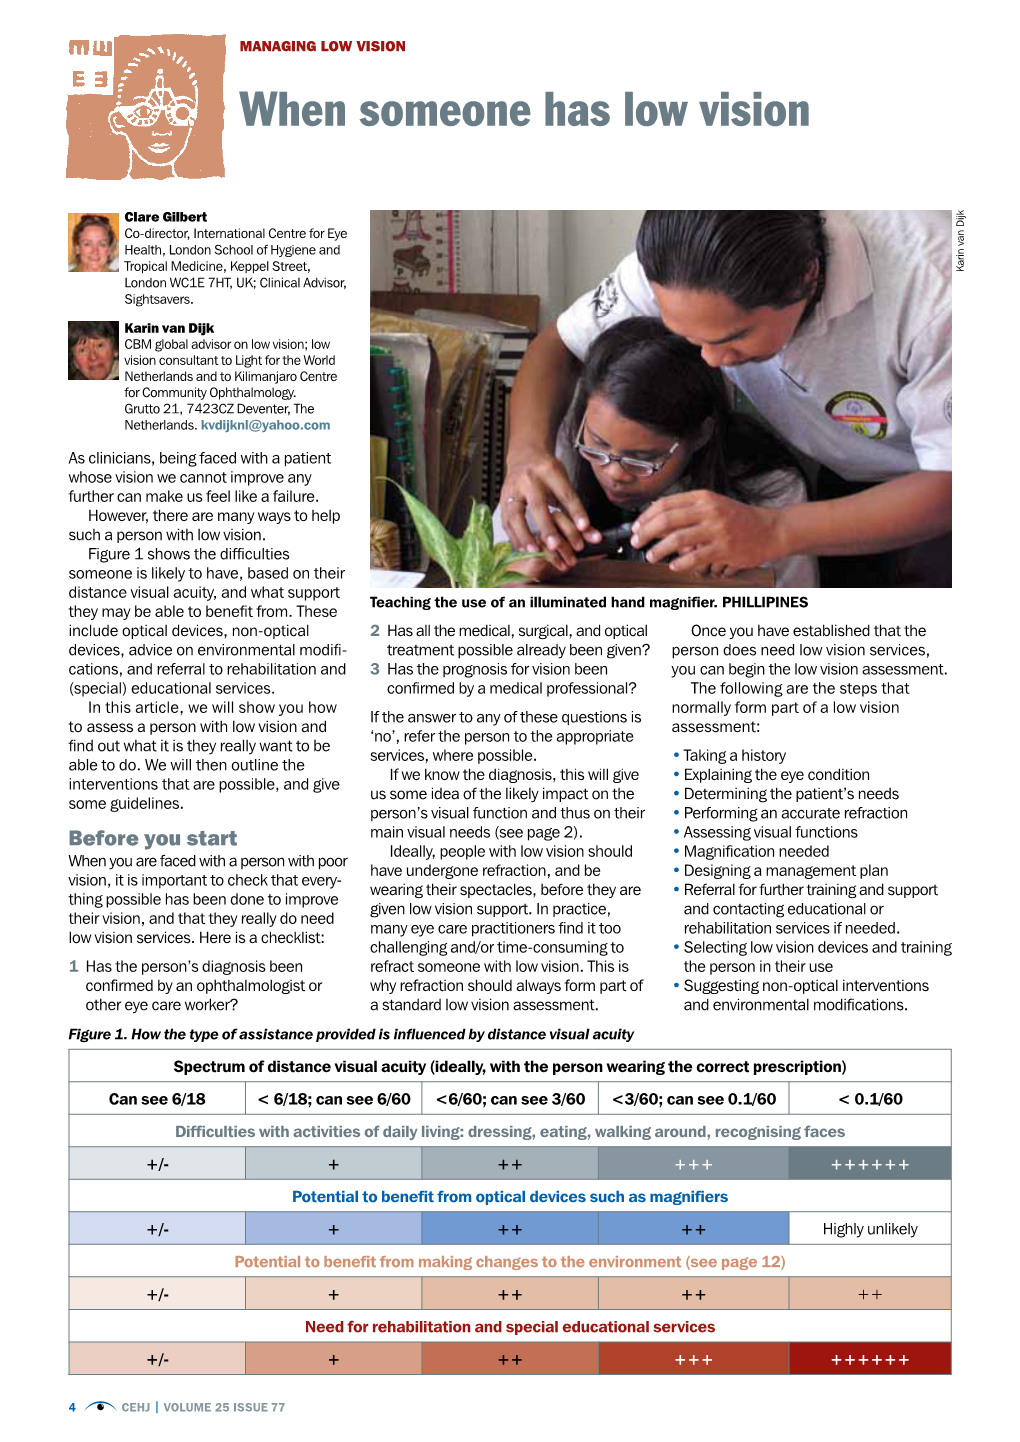 "When Someone Has Low Vision" Community Eye Health Journal Vol